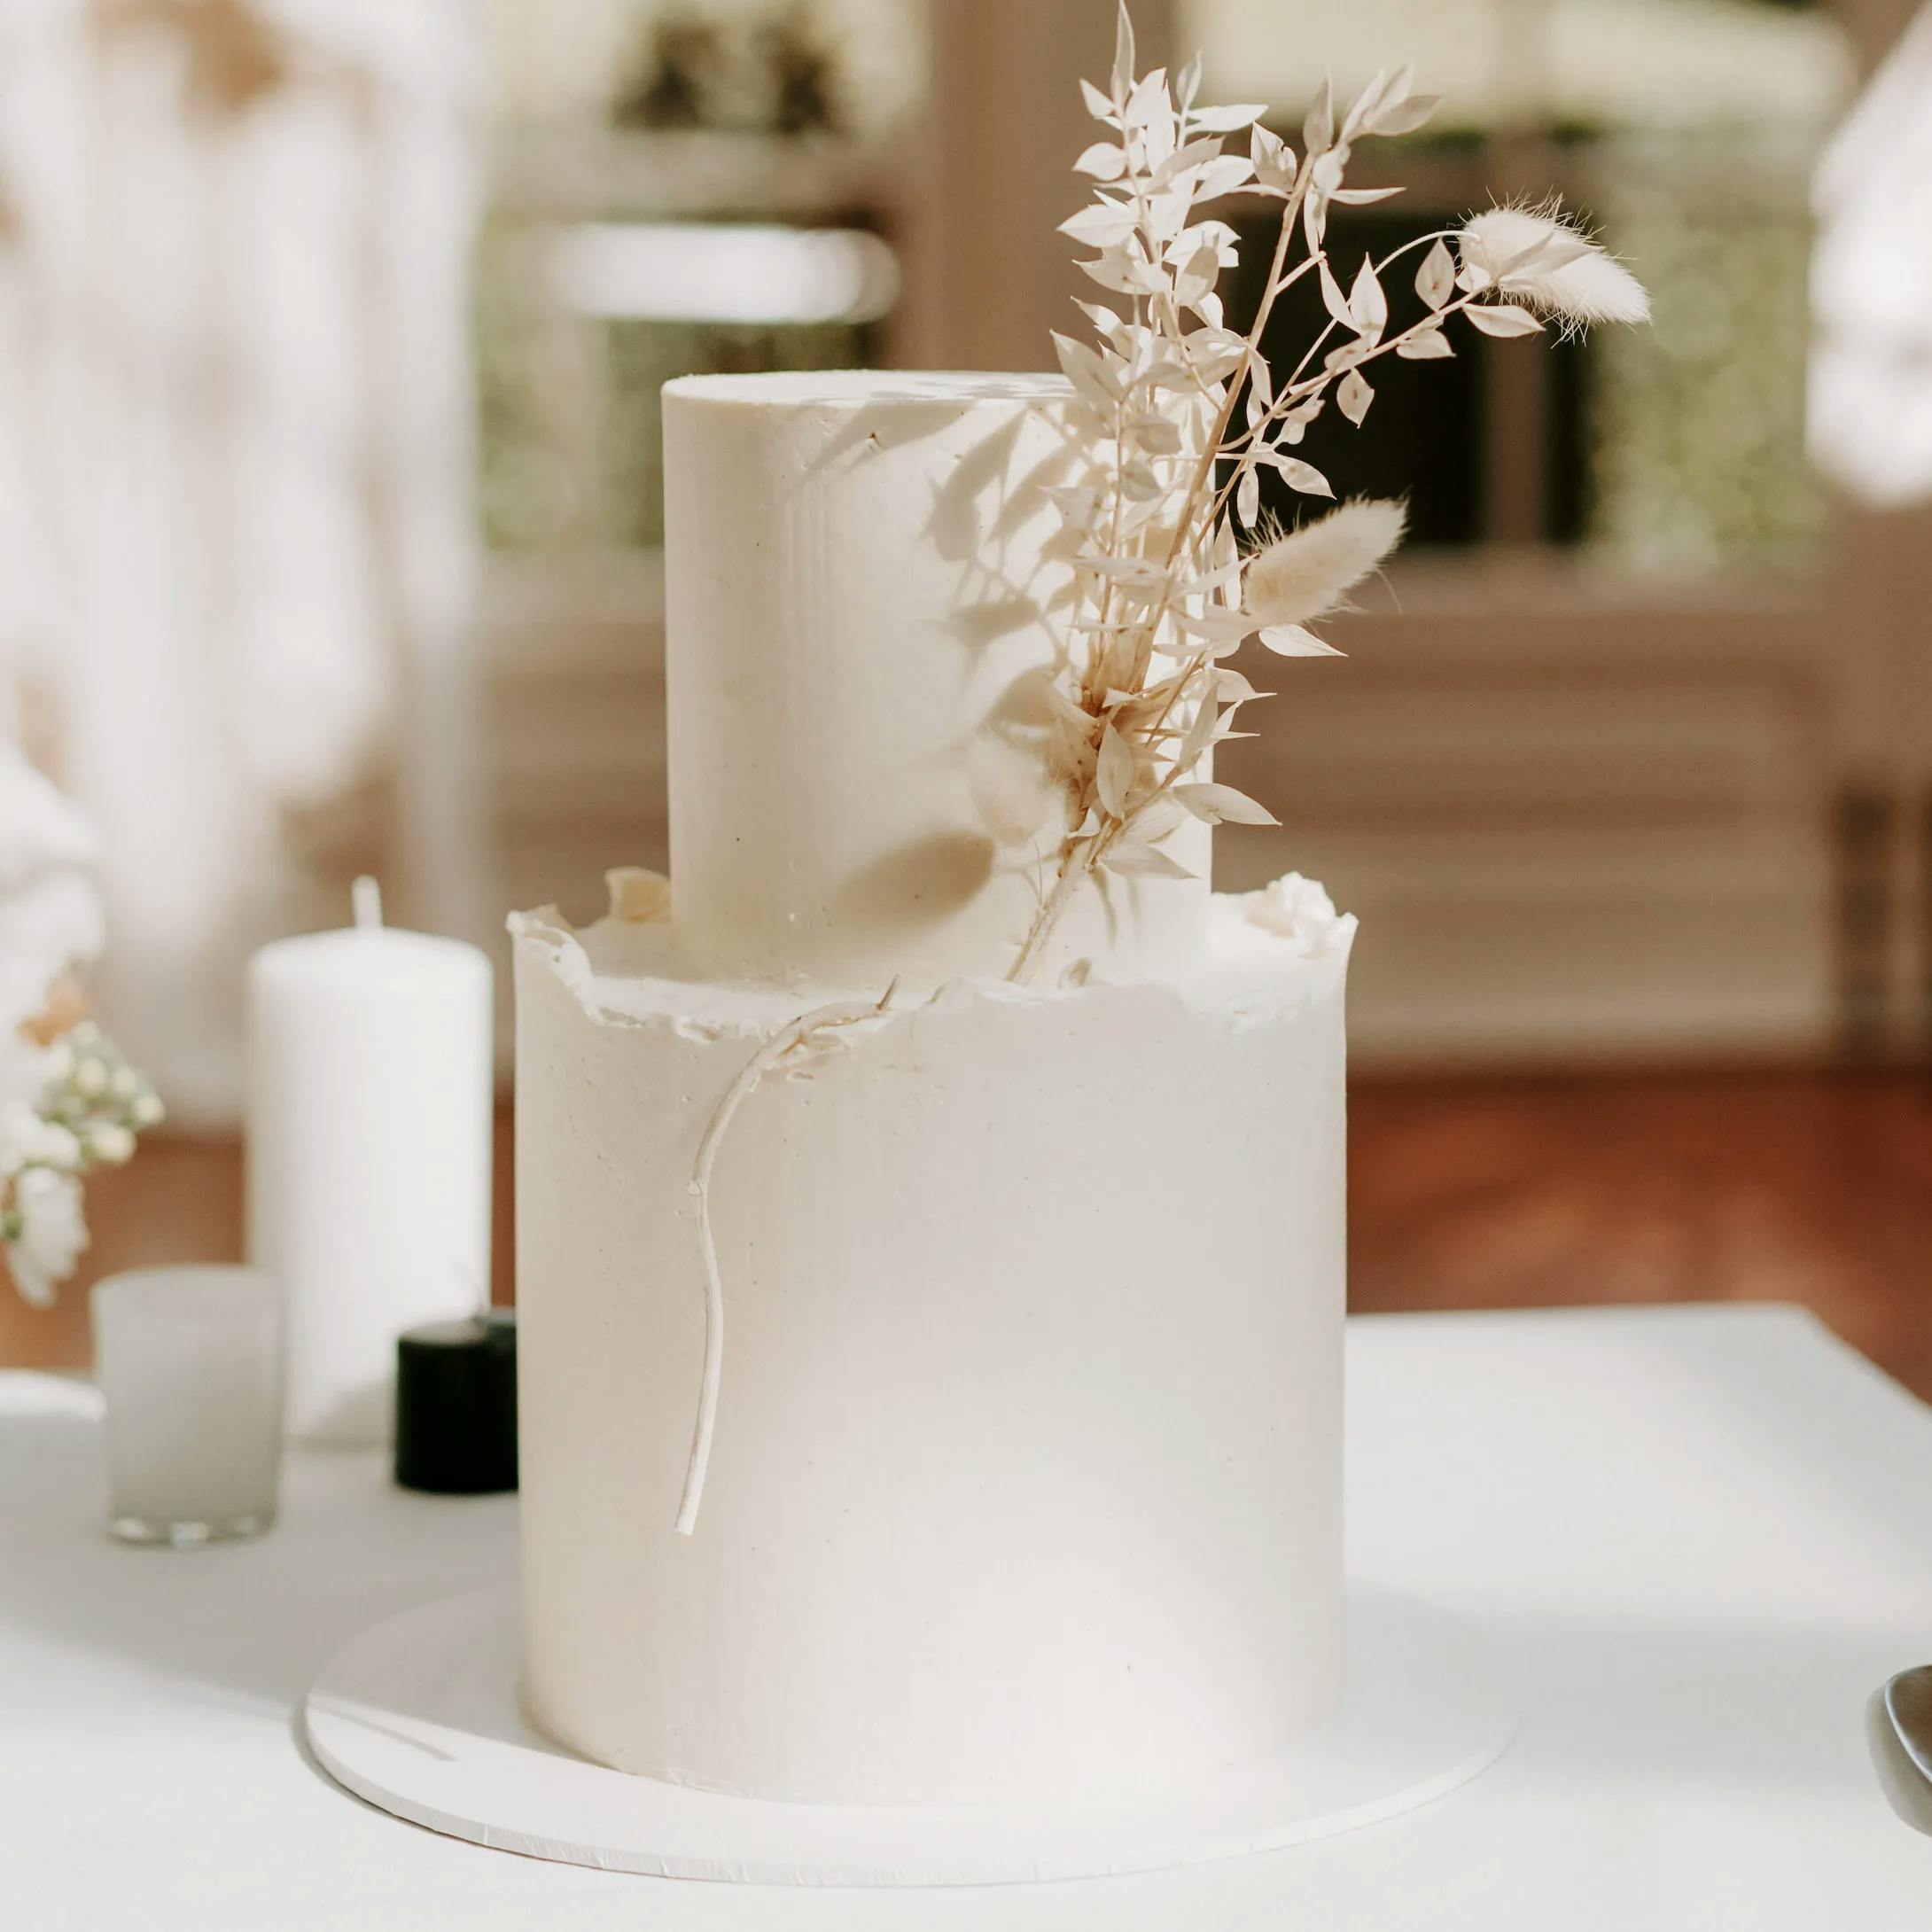 Wedding cake with dried florals